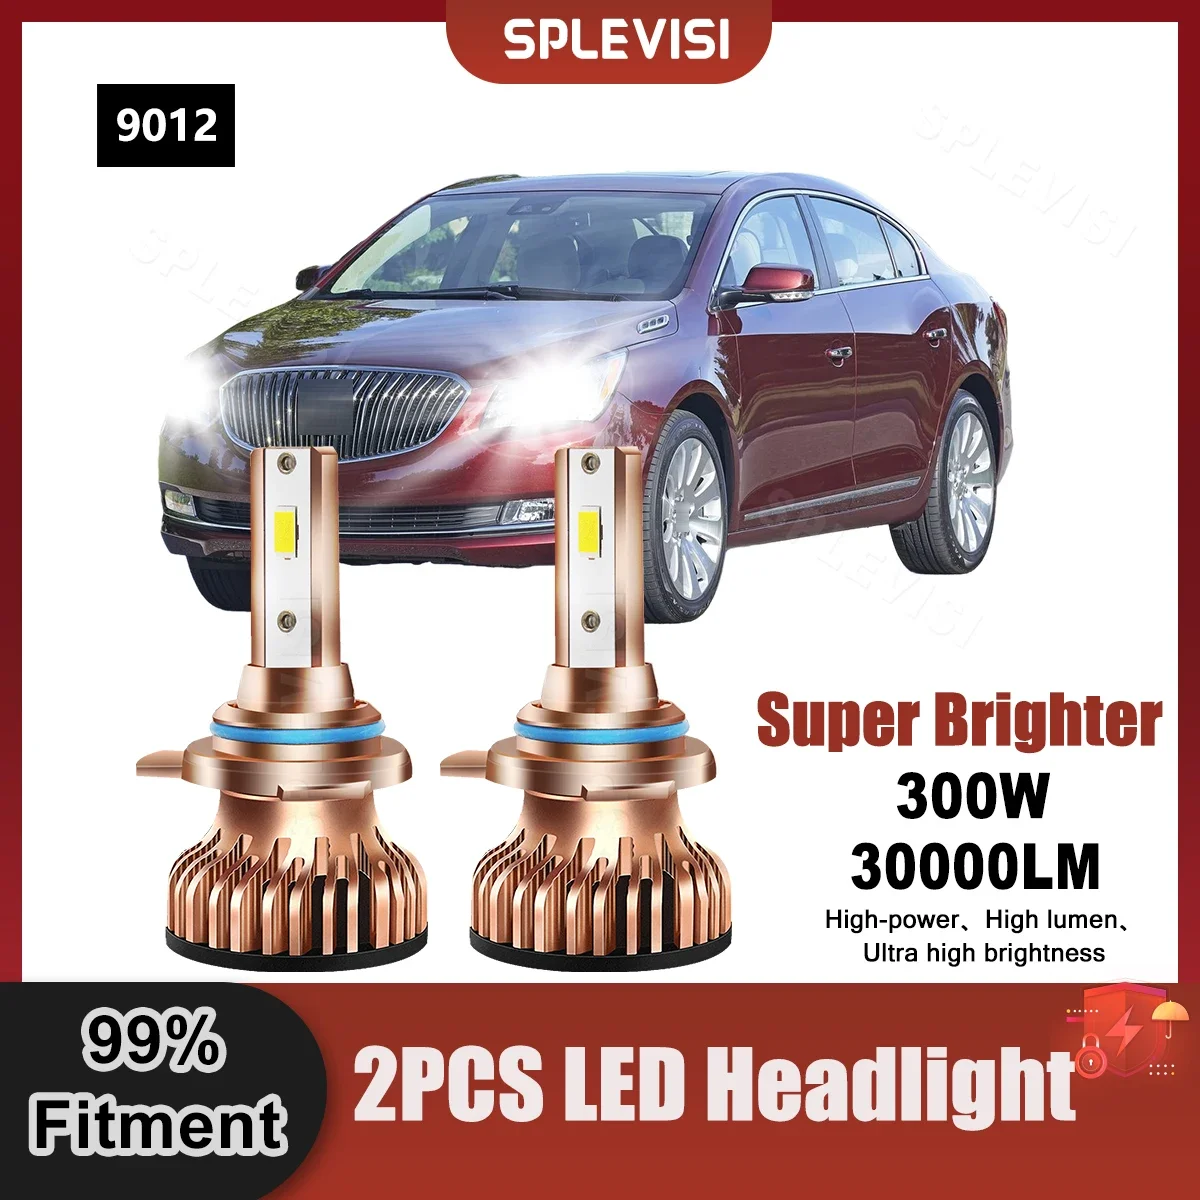 

2X 9012 Replace LED Headlamp Bulbs 9V-24V 300W 30000LM Superior CSP Chips For Buick LaCrosse 2014 2015 2016 Car Headlight Bulbs